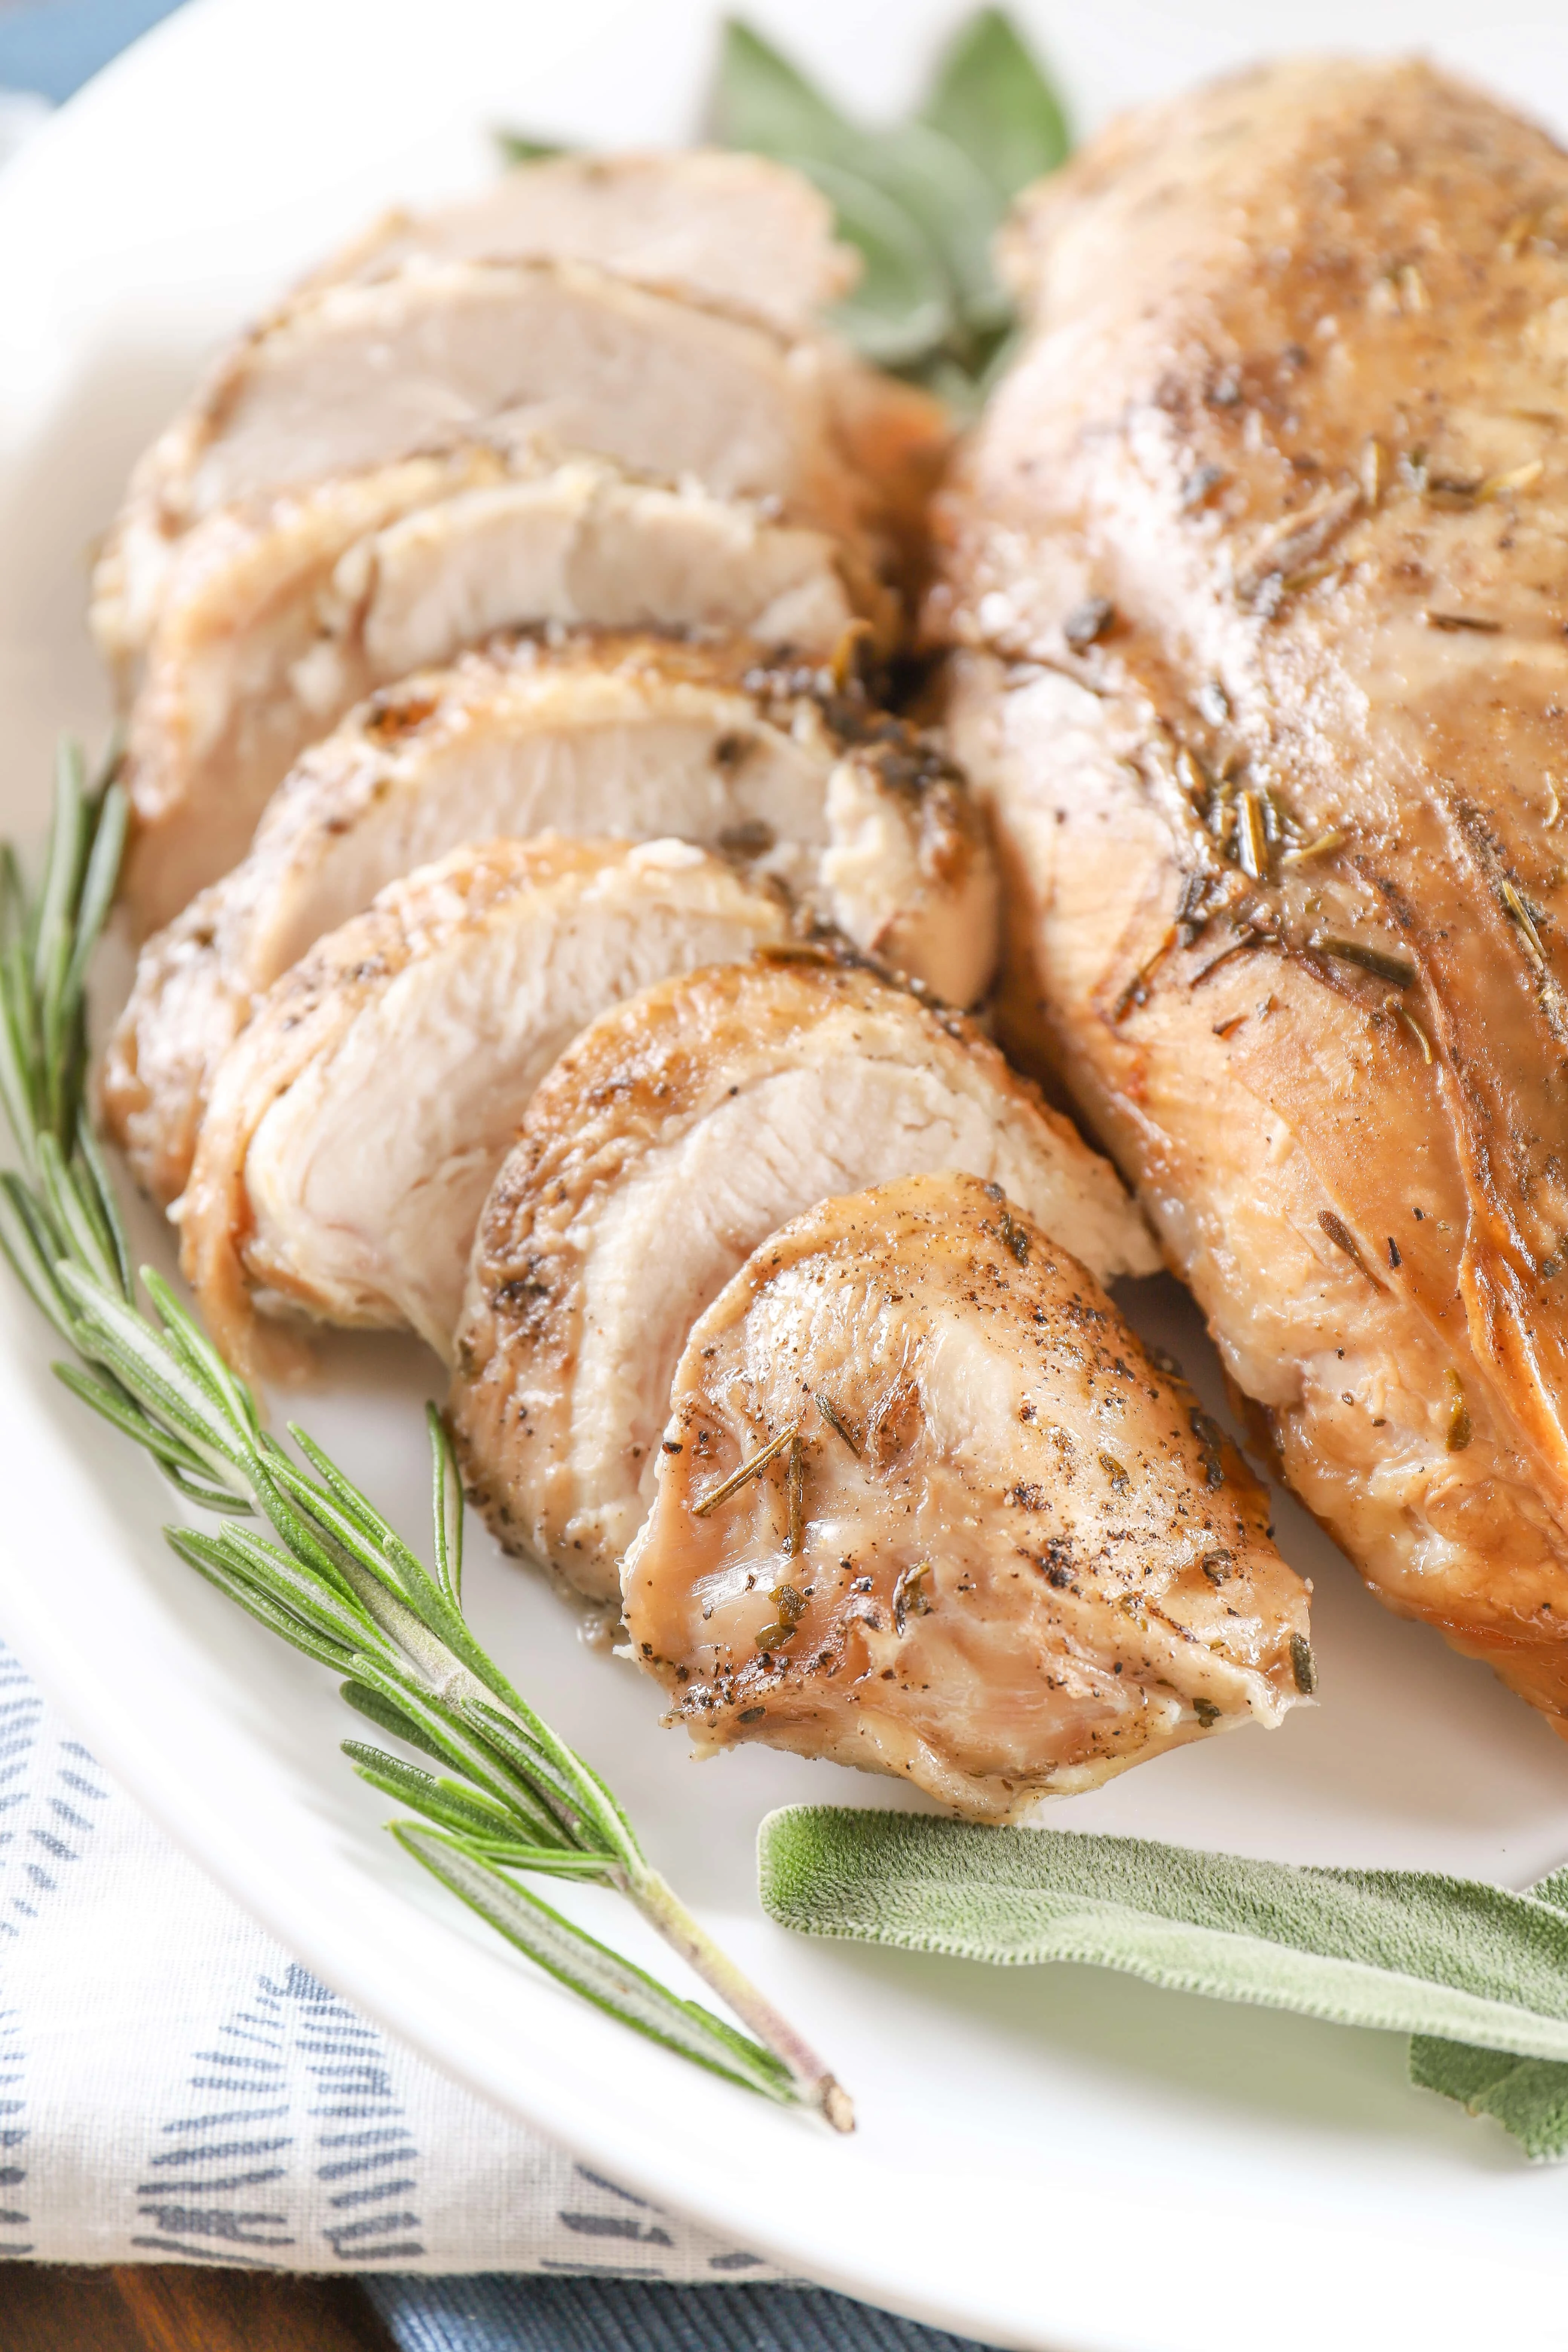 Slow Cooker Whole Chicken Cooked in Cider Recipe